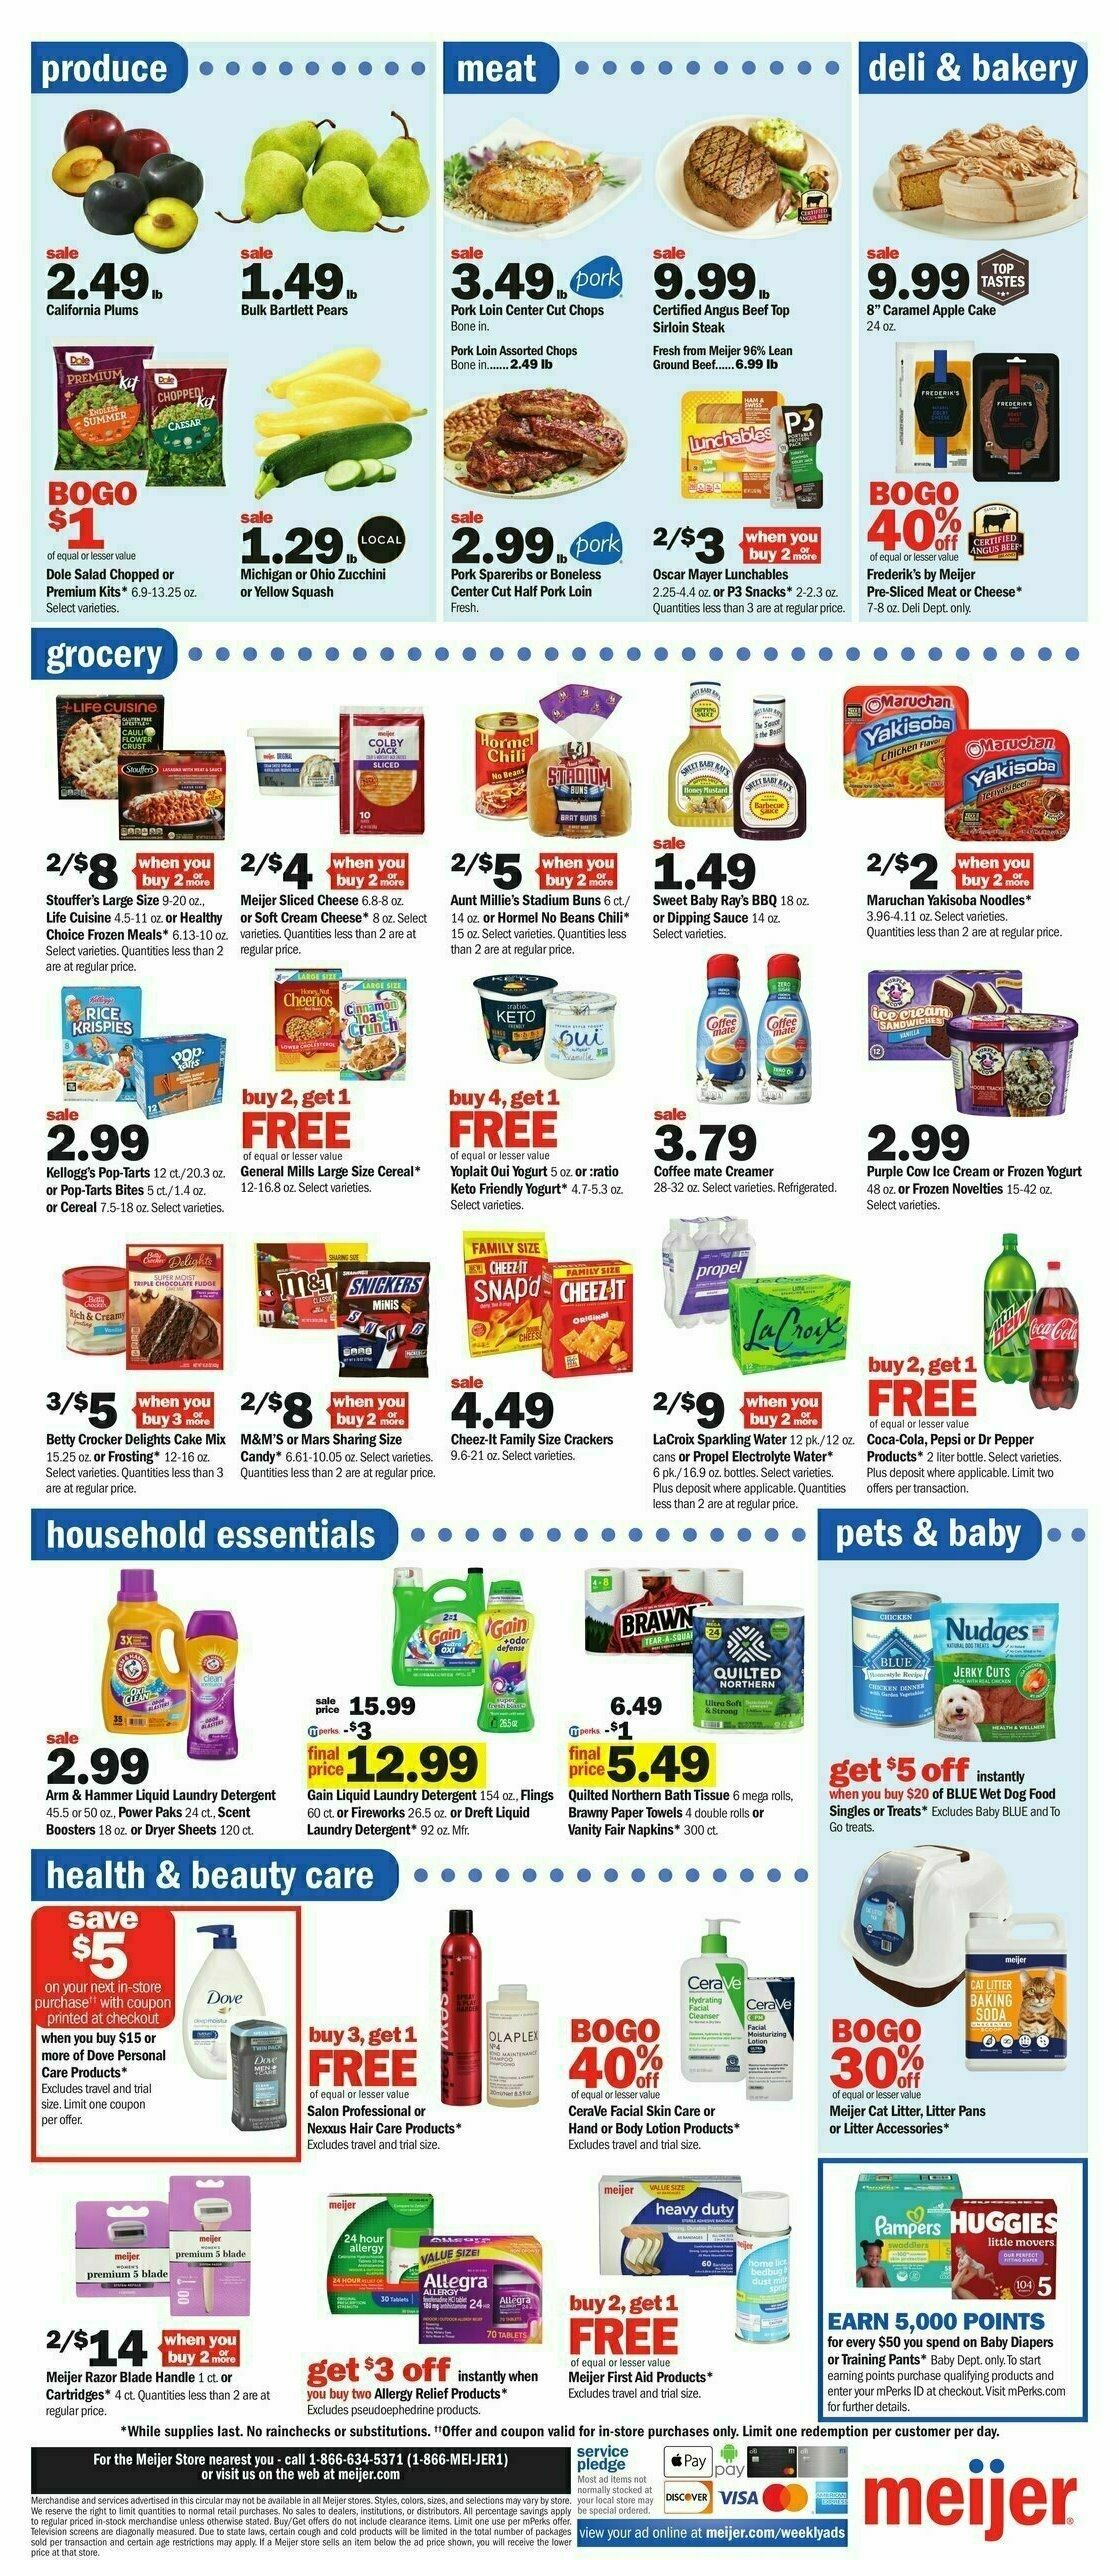 Meijer Weekly Ad from August 13